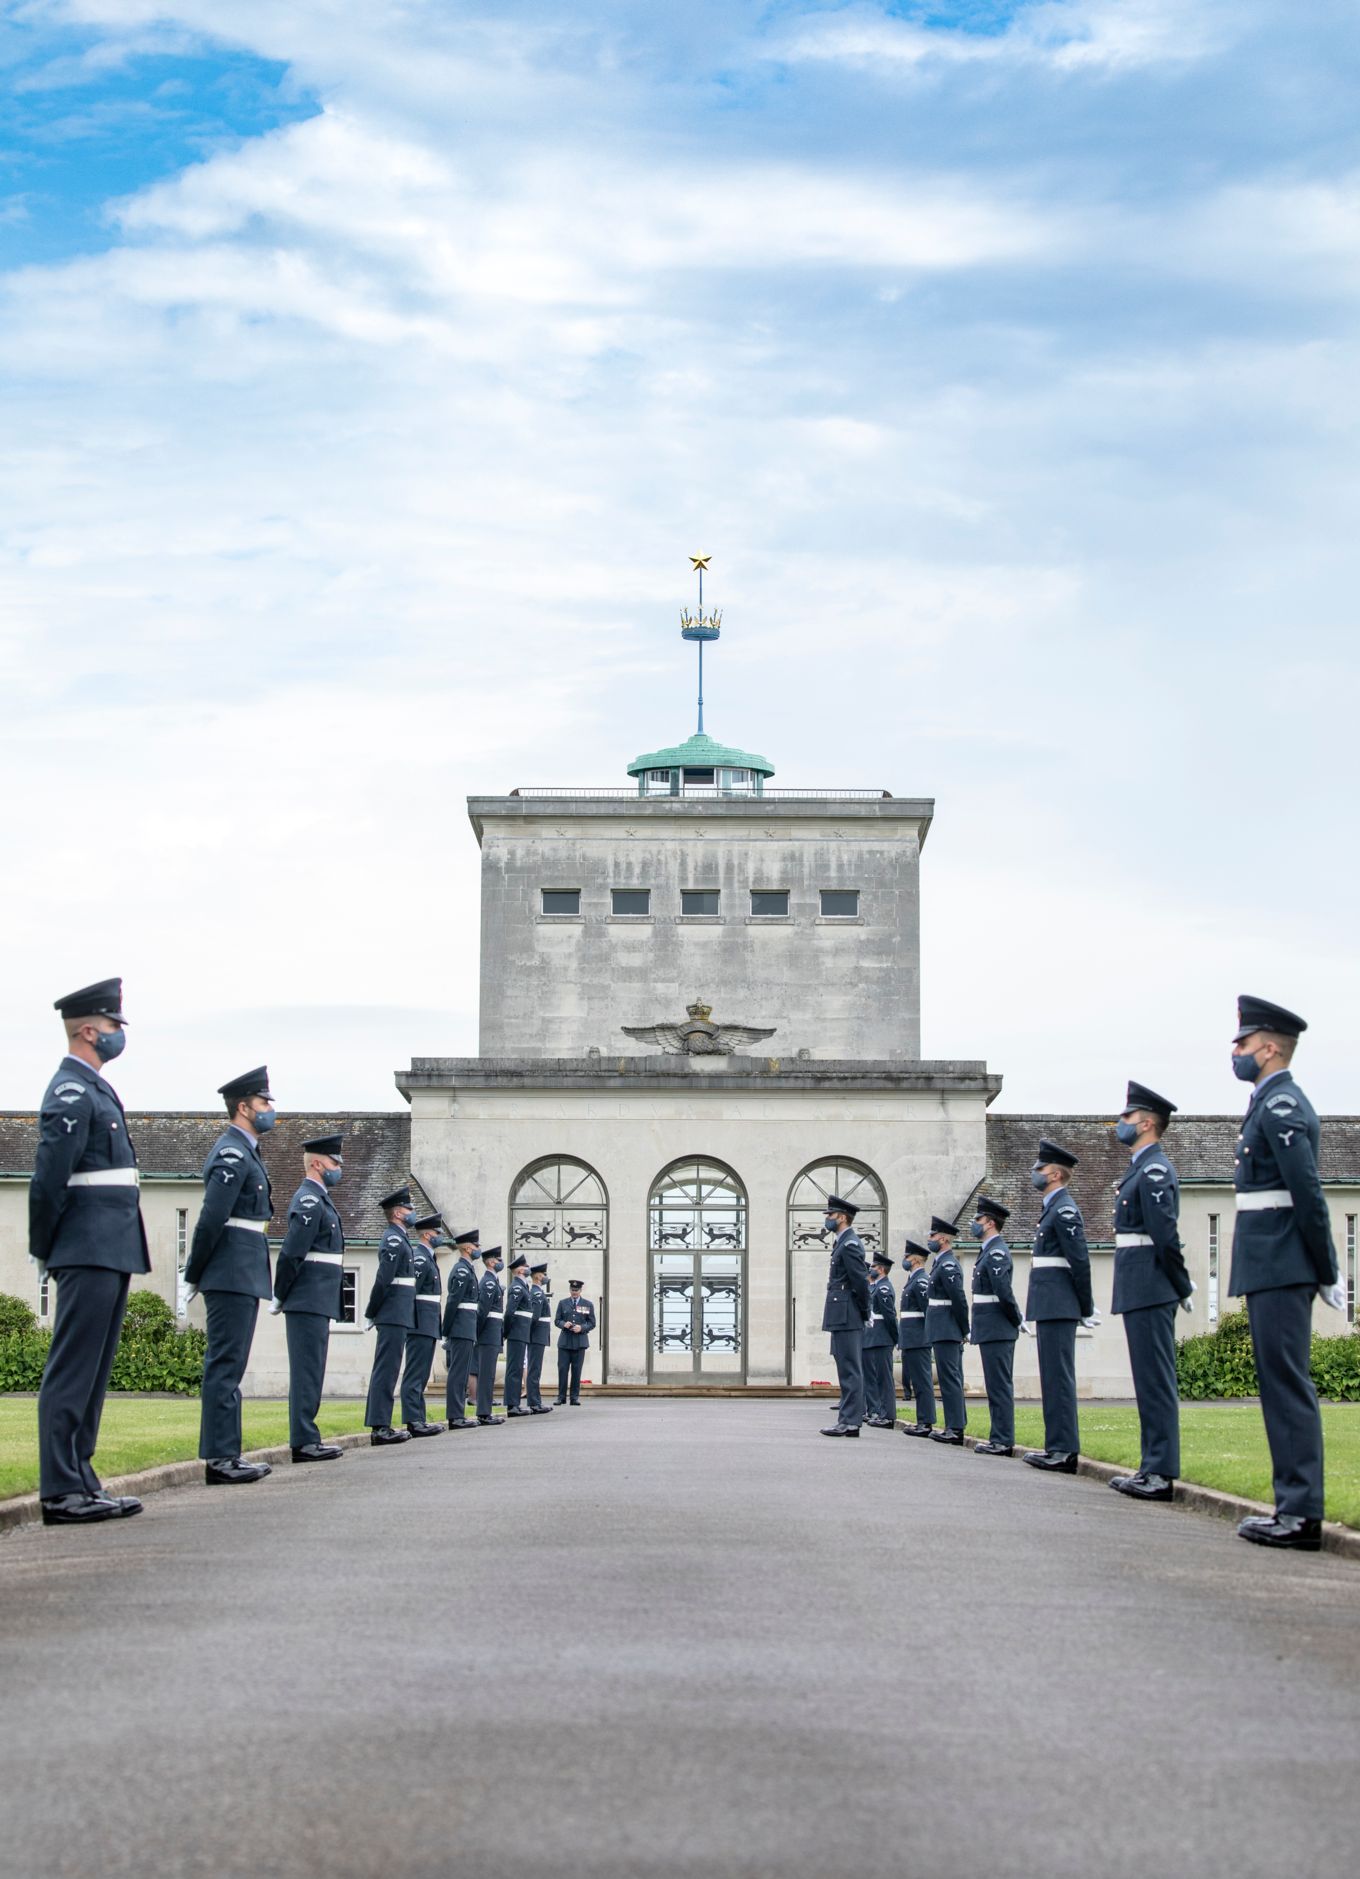 Image show RAF personnel at the Air Forces Memorial, otherwise known as the Runnymede Memorial.